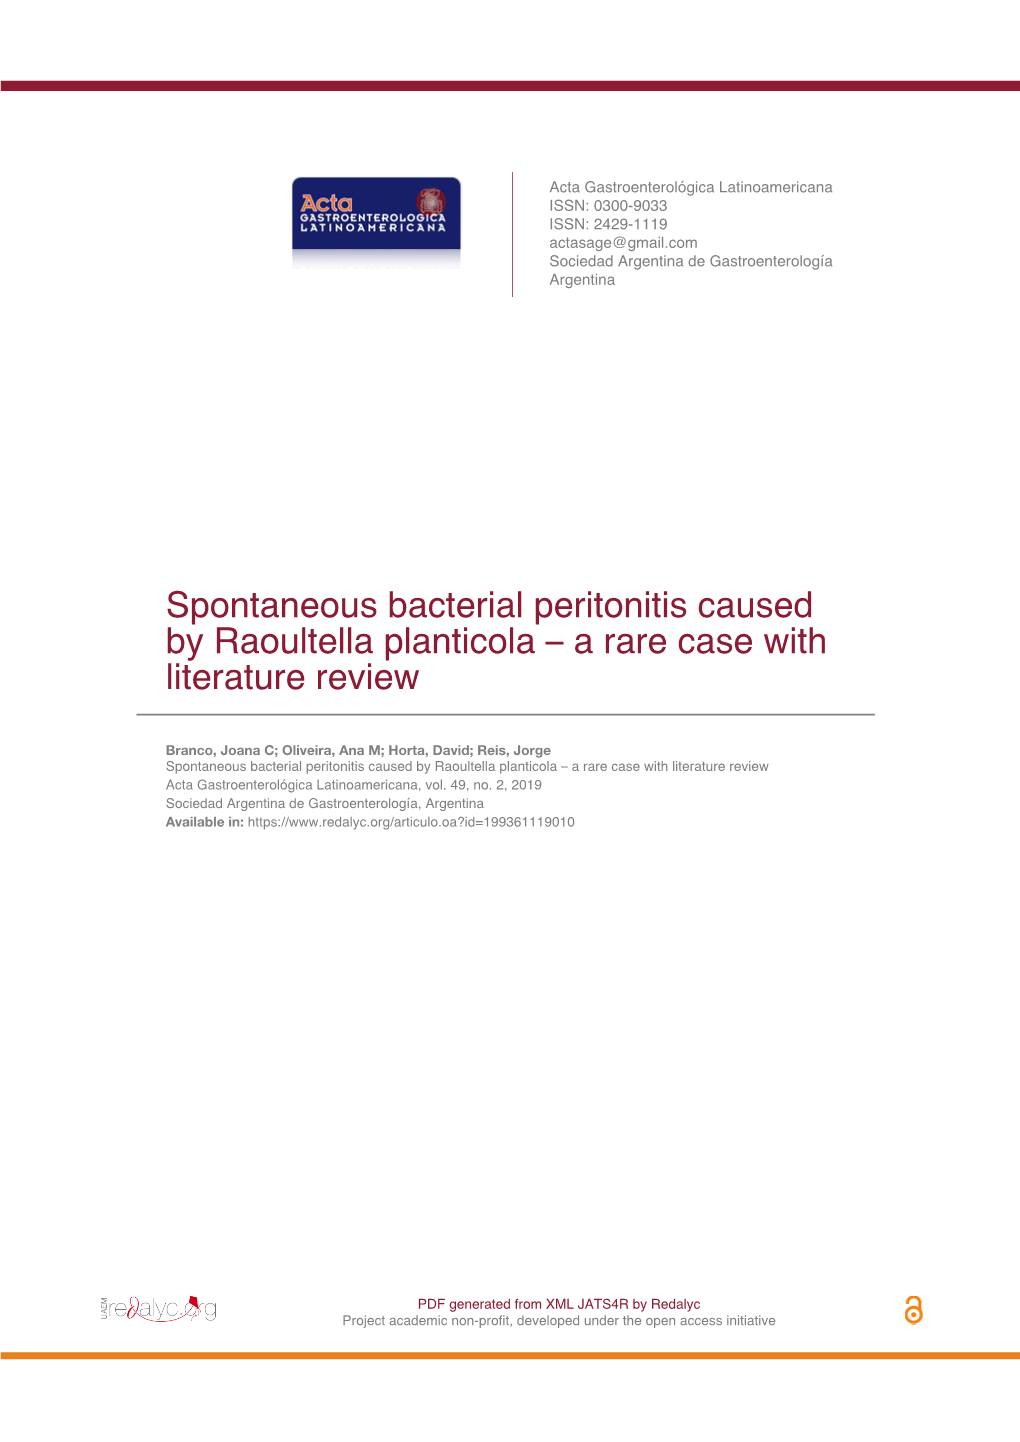 Spontaneous Bacterial Peritonitis Caused by Raoultella Planticola – a Rare Case with Literature Review